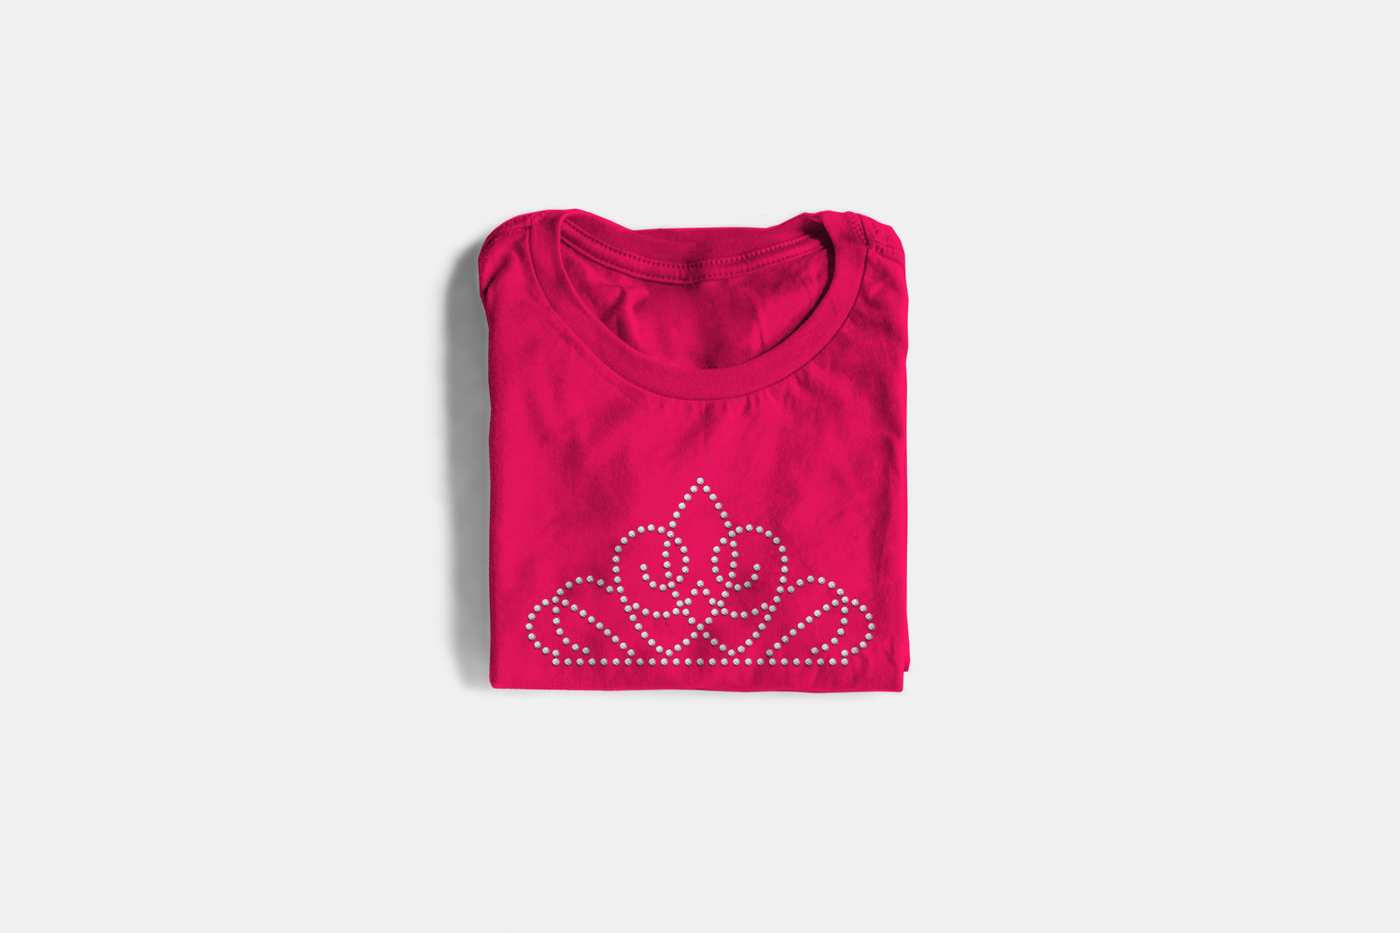 A hot pink folded tee on a light grey background. The tee has a tiara design in clear rhinestones.